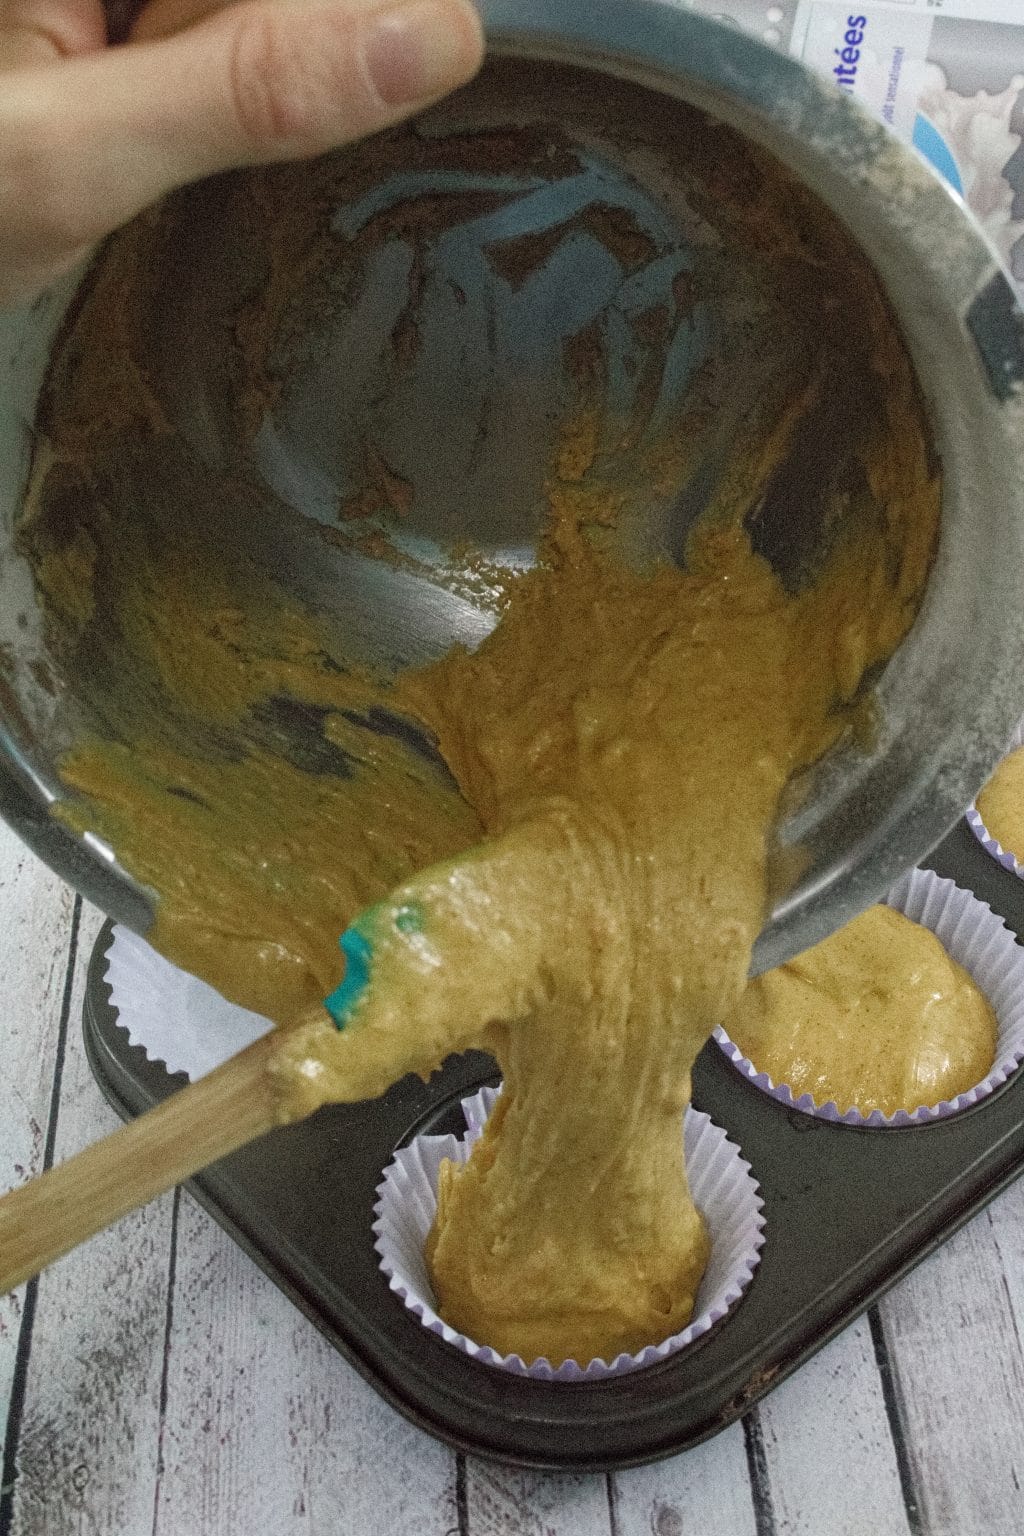 Muffin batter being poured from a steel bowl into a lined muffin tray